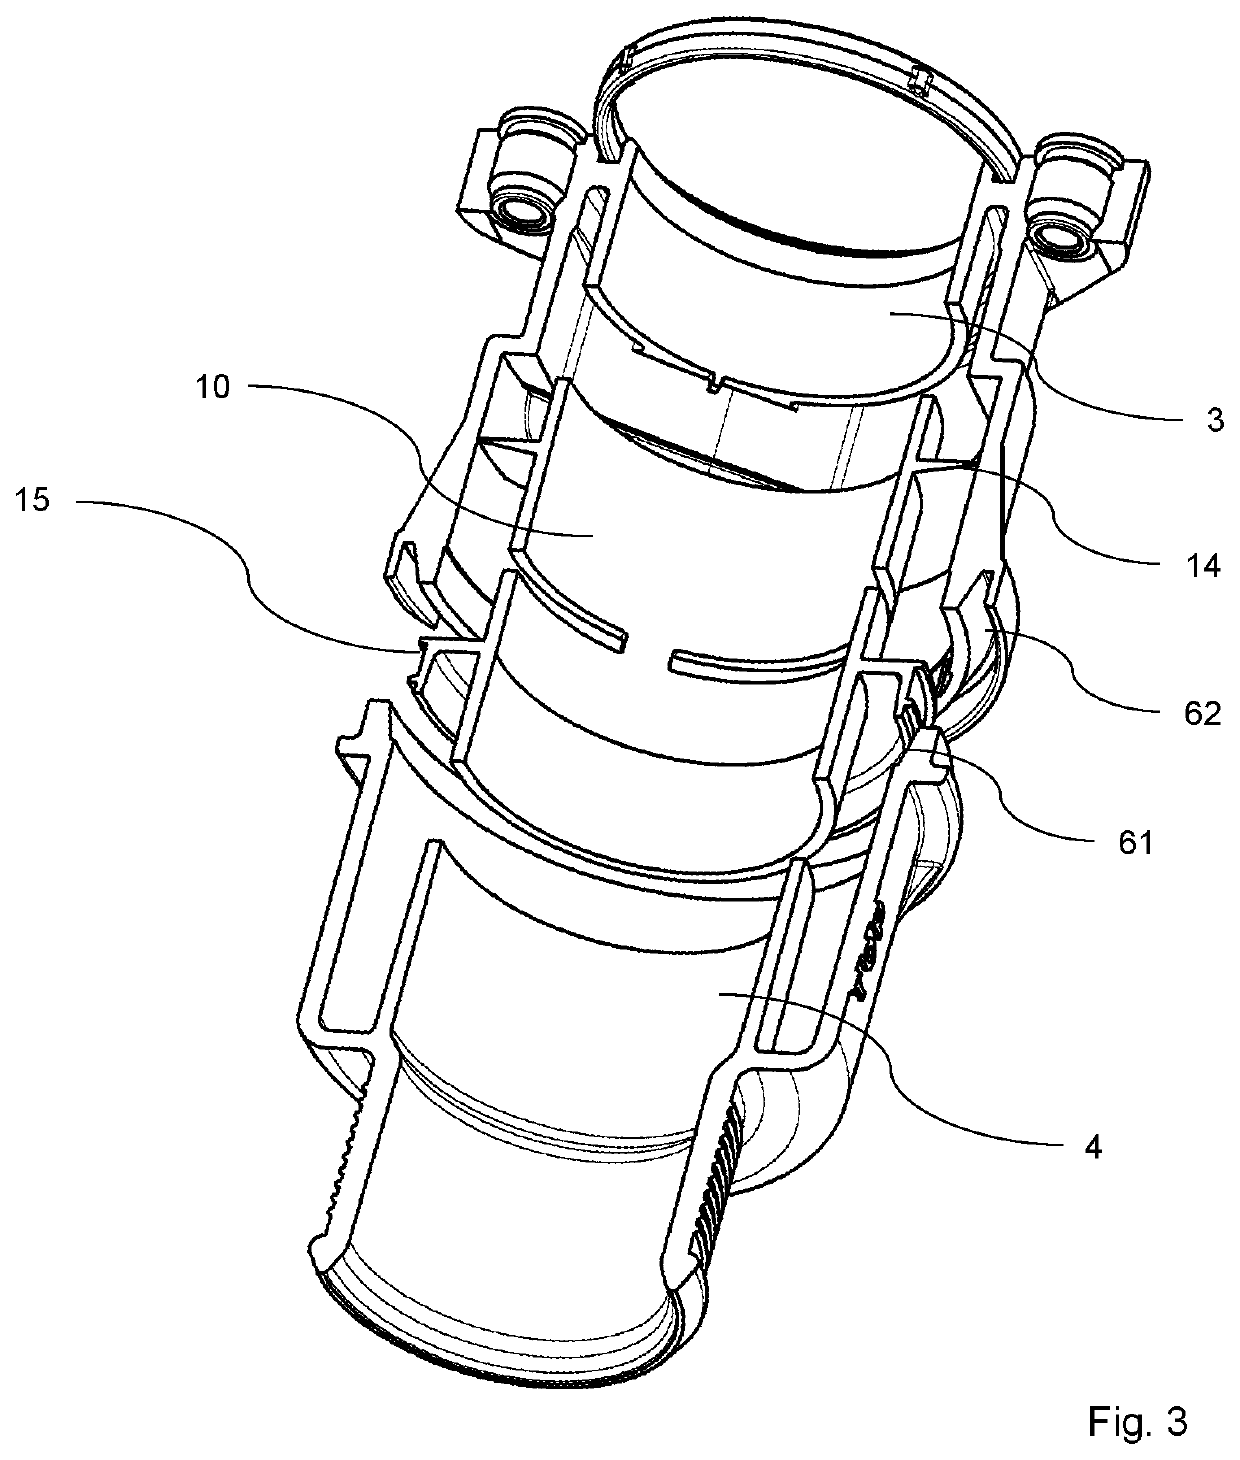 Silencer for the reduction of gas noise in an intake system of a combustion engine and a method for the production of such a silencer